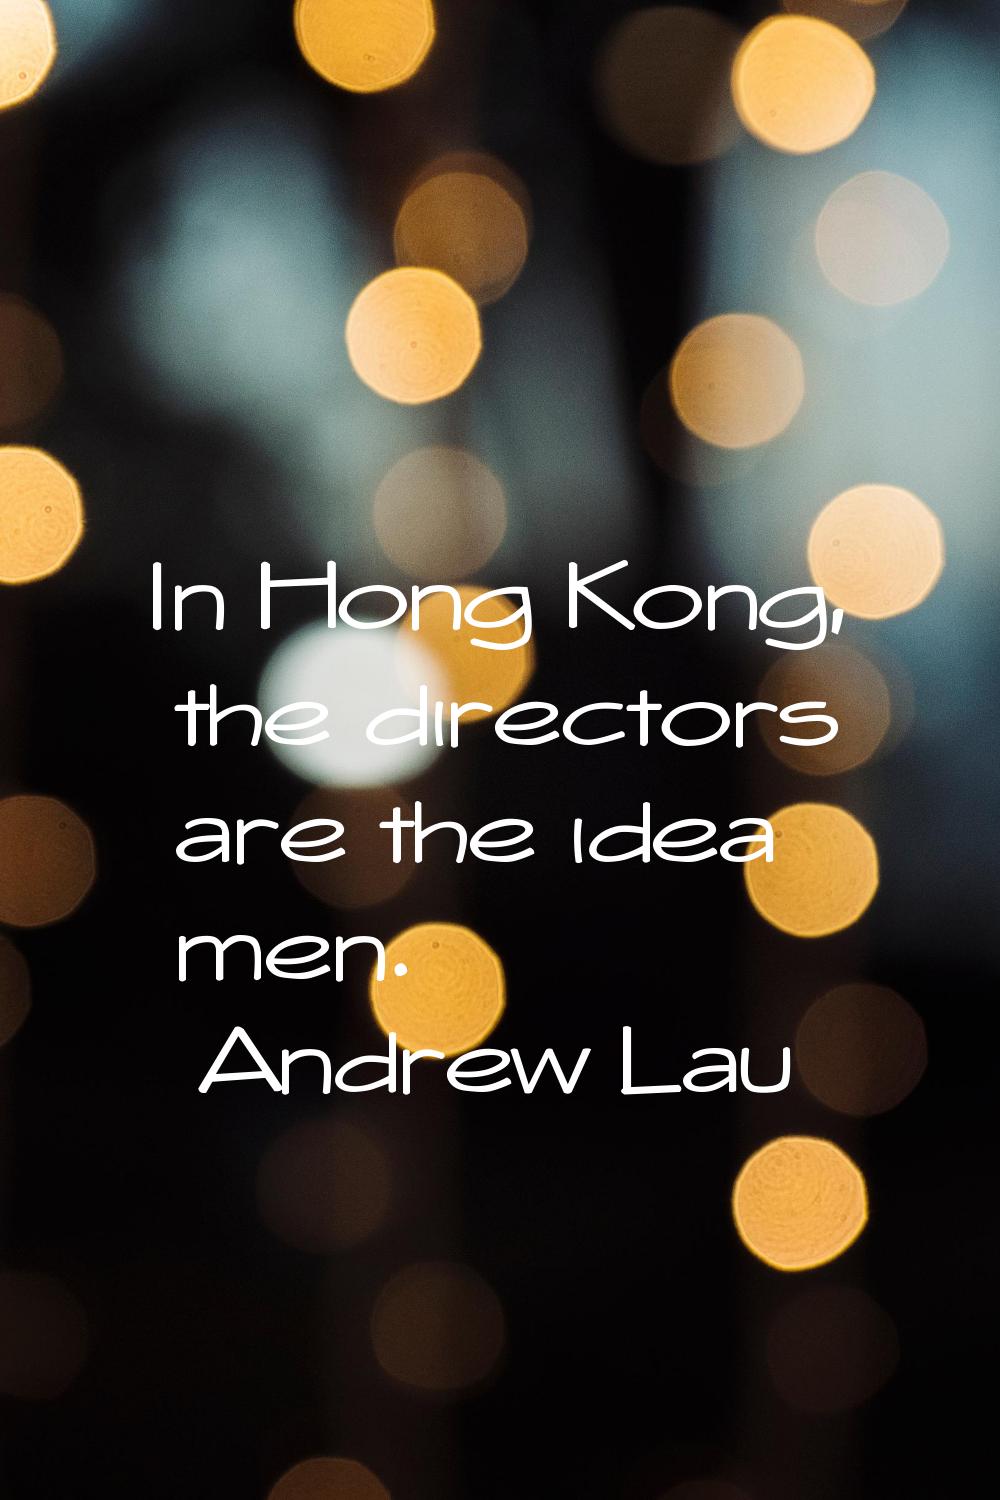 In Hong Kong, the directors are the idea men.